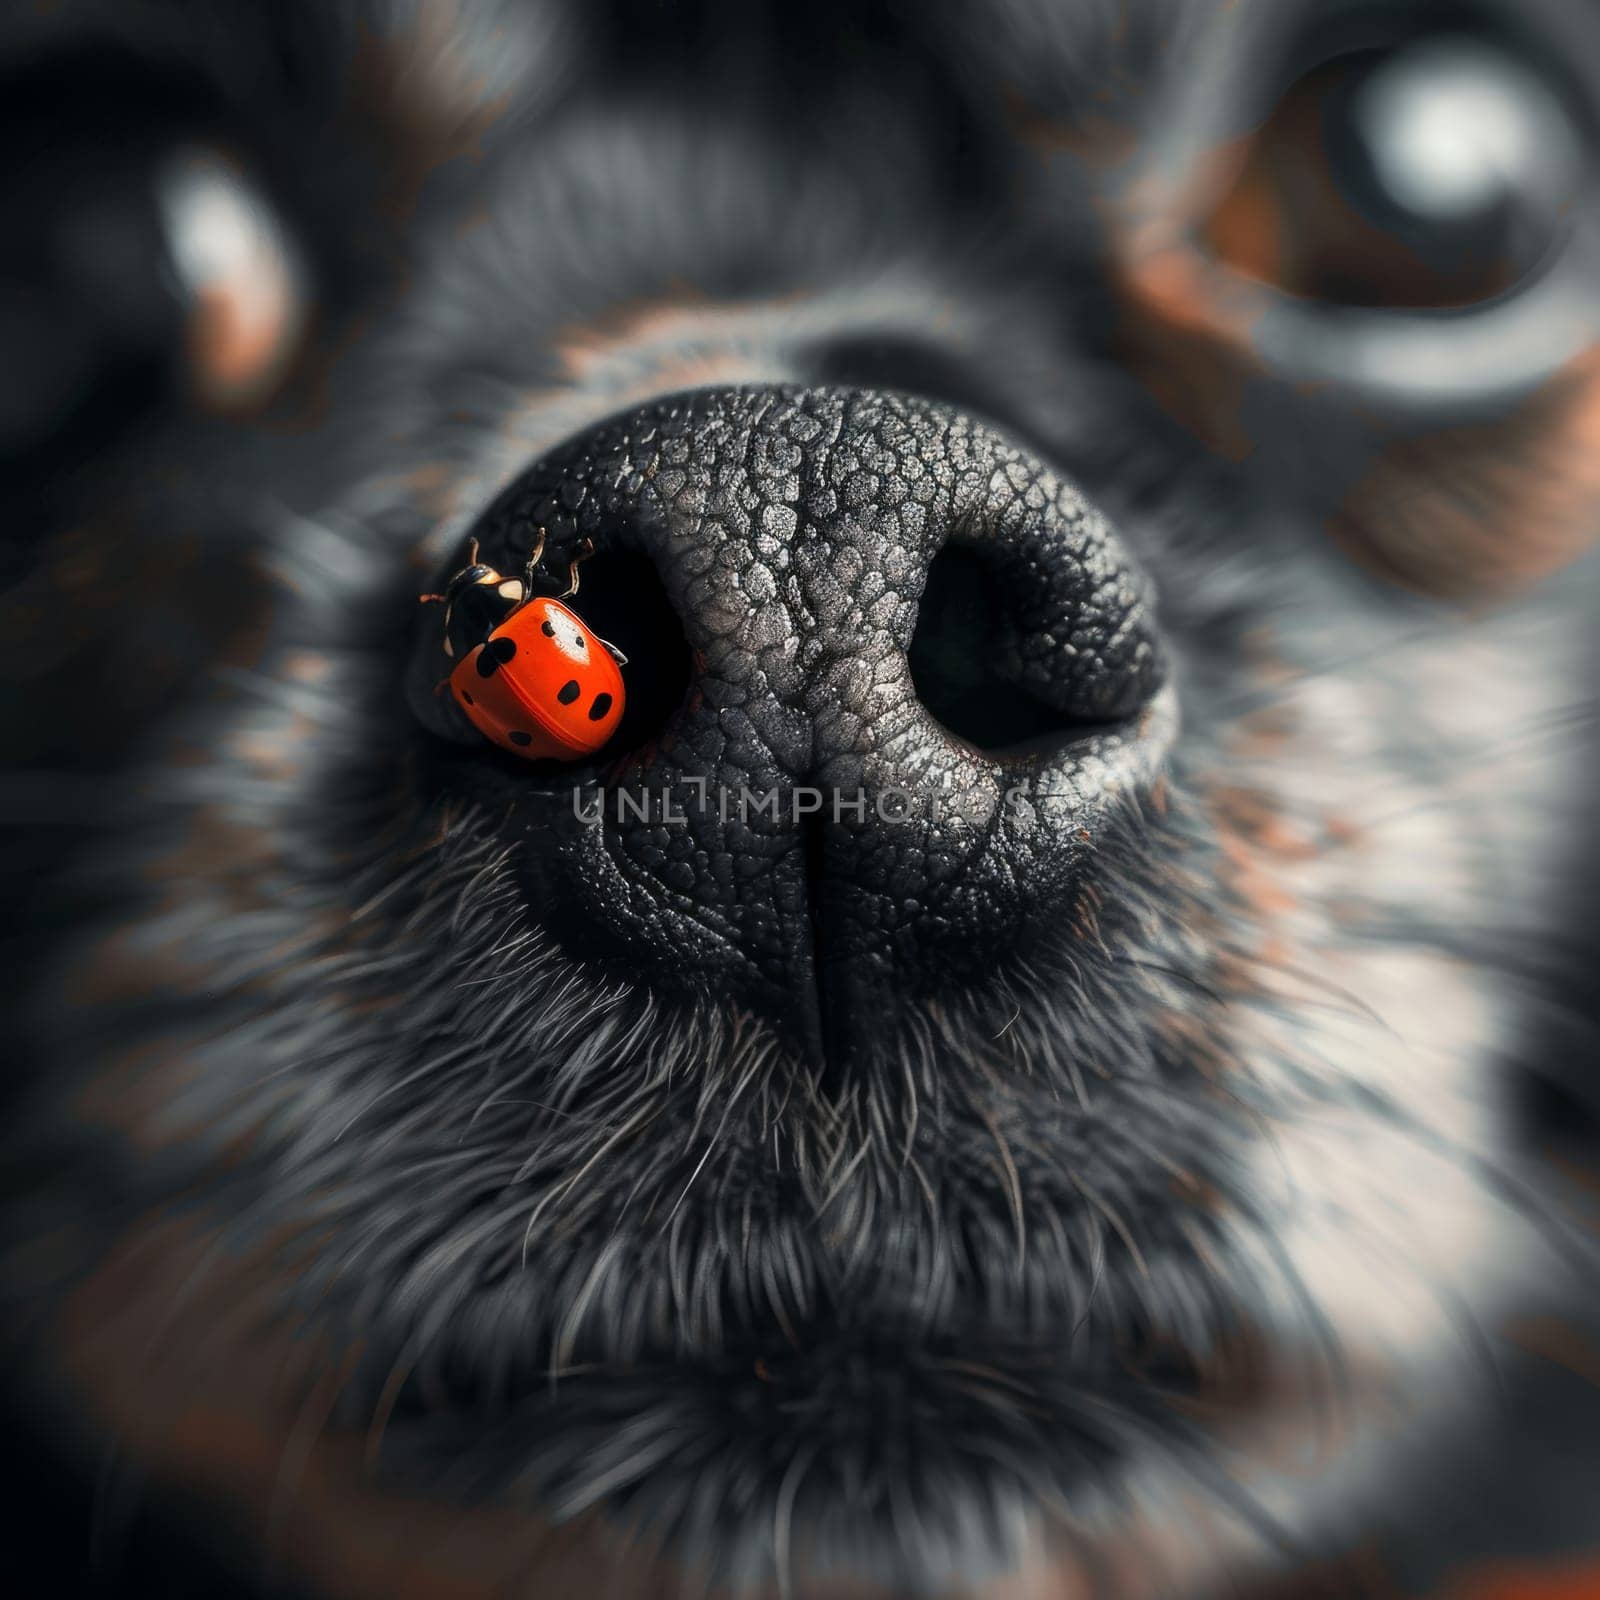 A ladybug ventures across the snout of a dog, its red and black shell standing out against the dog's textured skin. The image captures a charming interaction in nature.